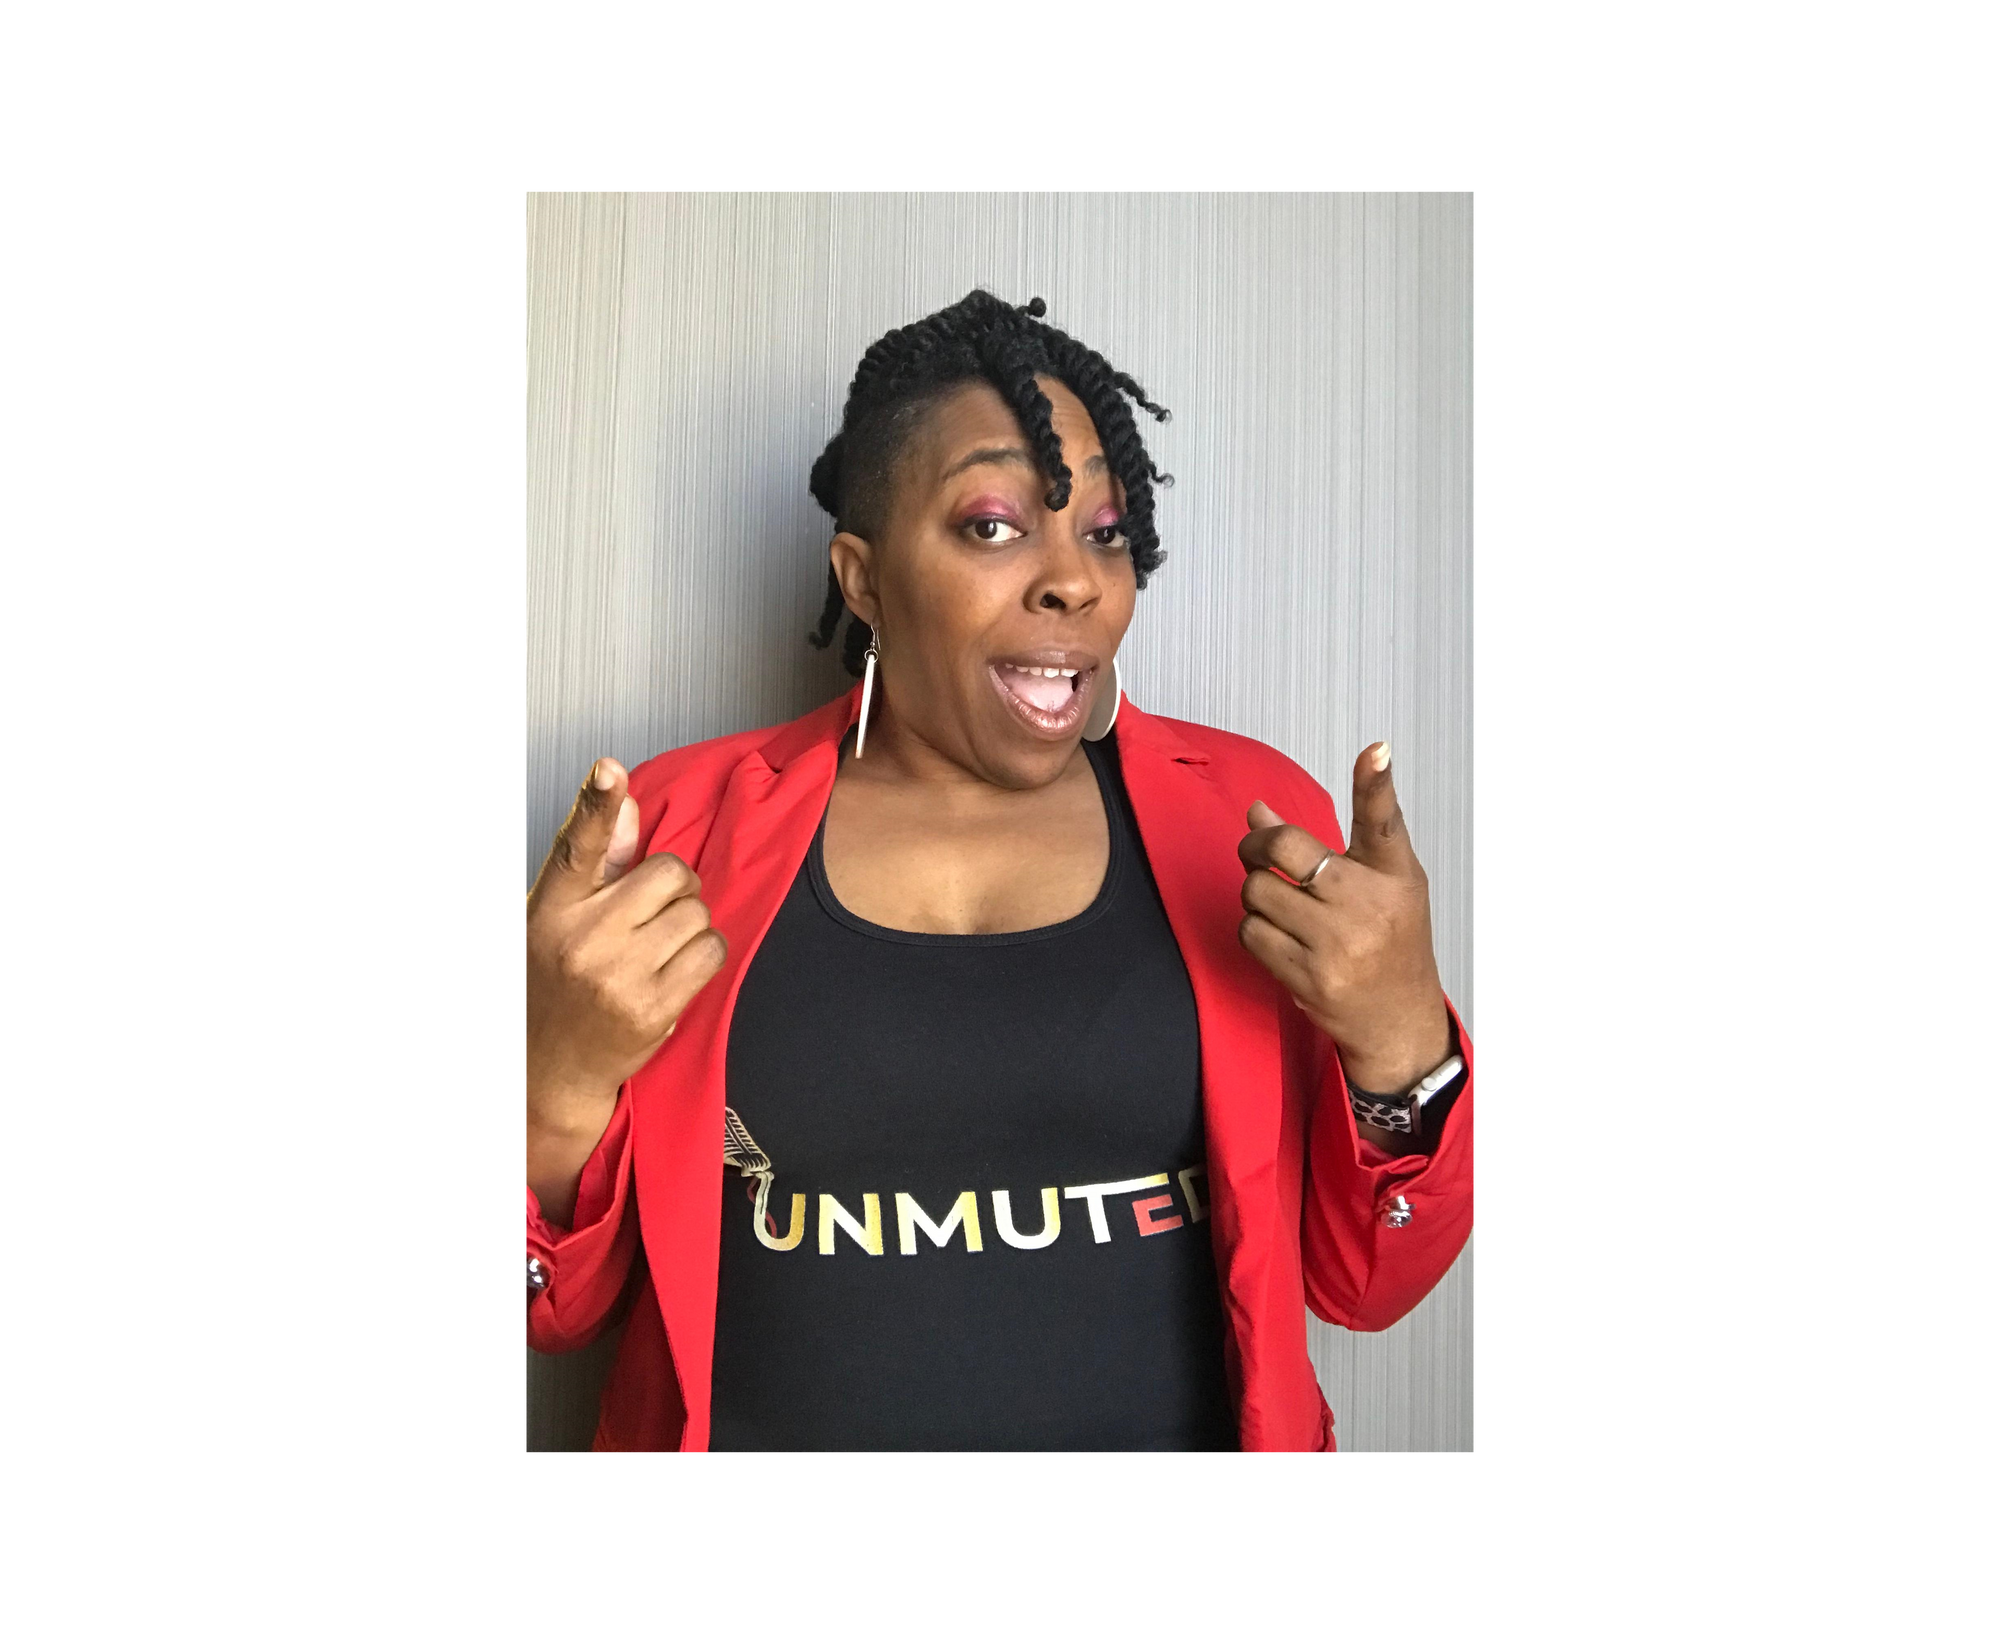 Unmuting Voices Globally - Altovise Unmuted